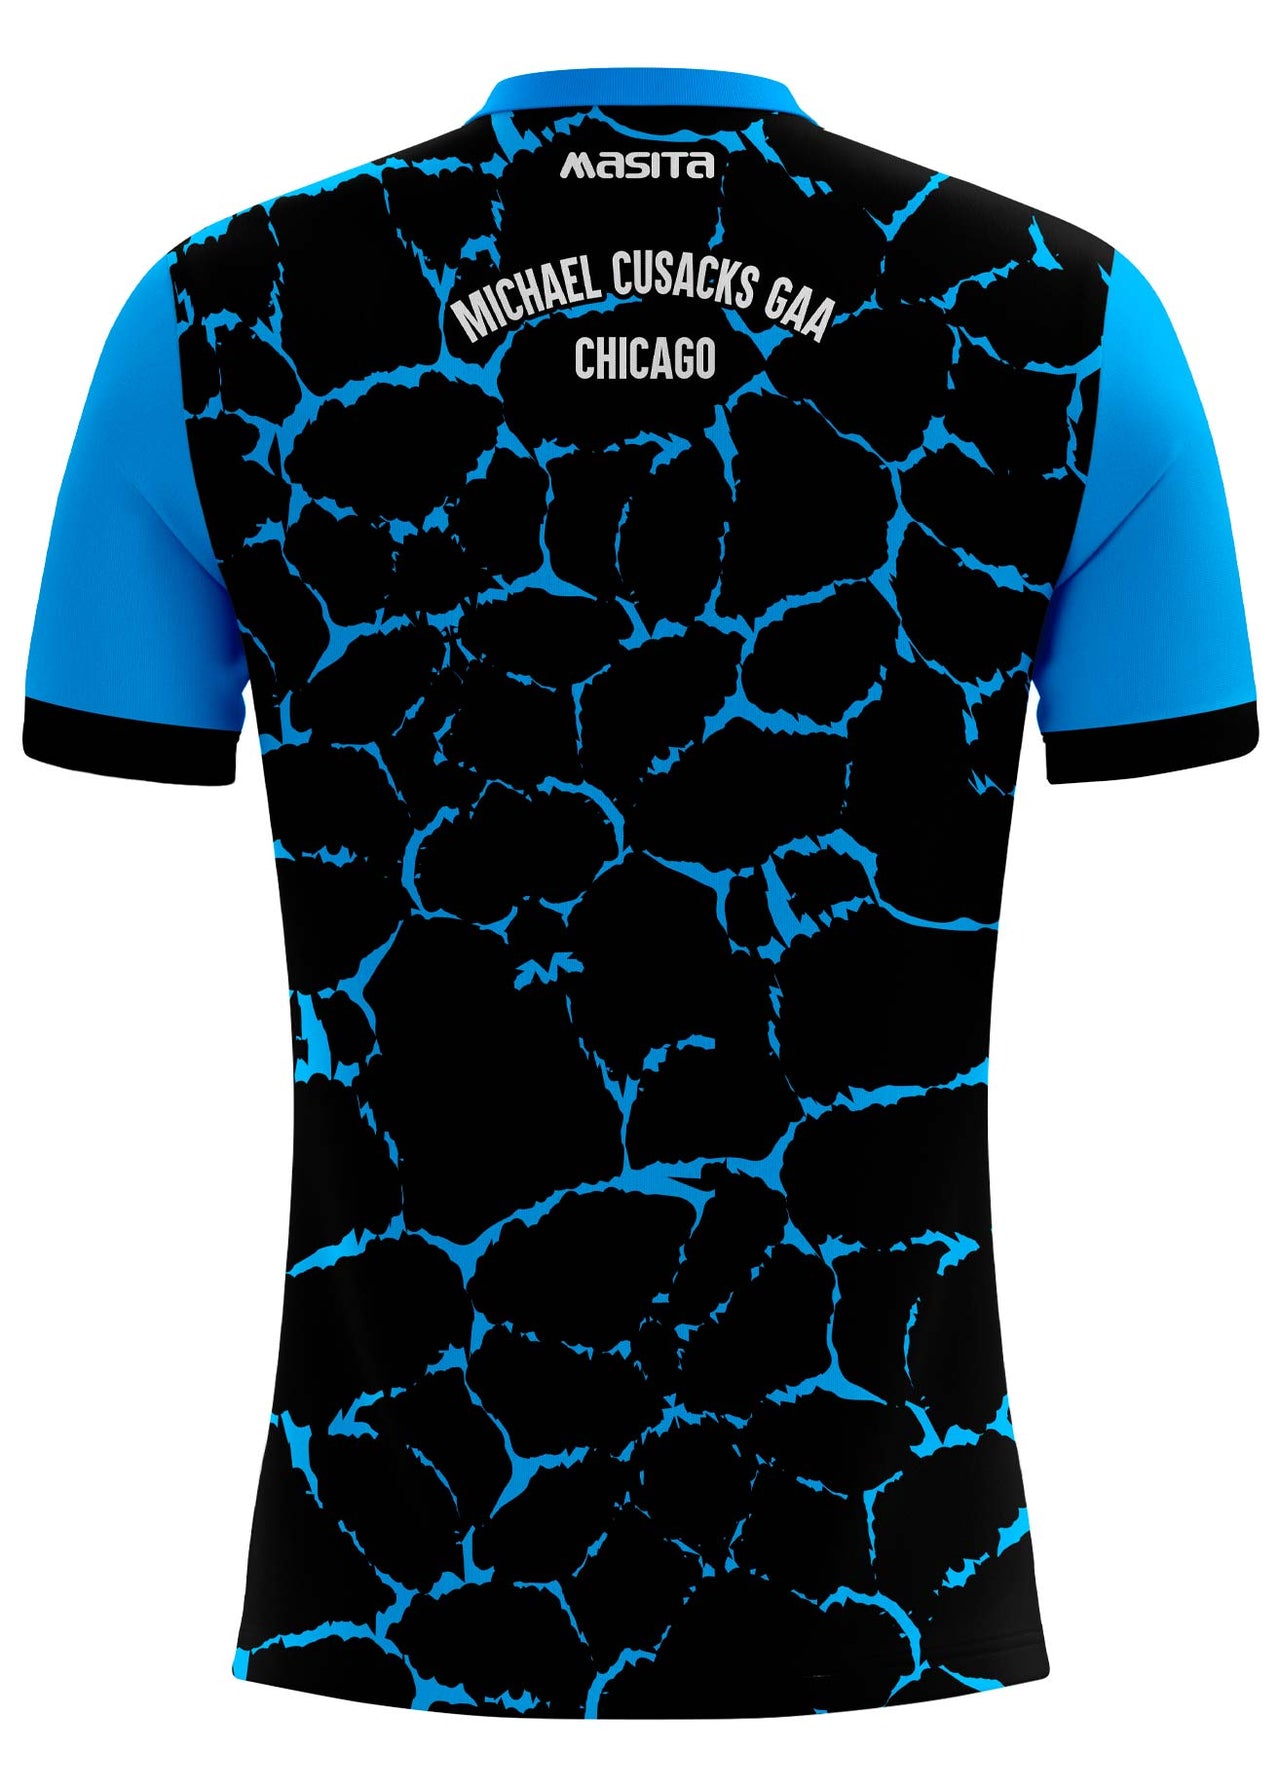 Michael Cusack's HC Chicago Training Jersey Player Fit Adult